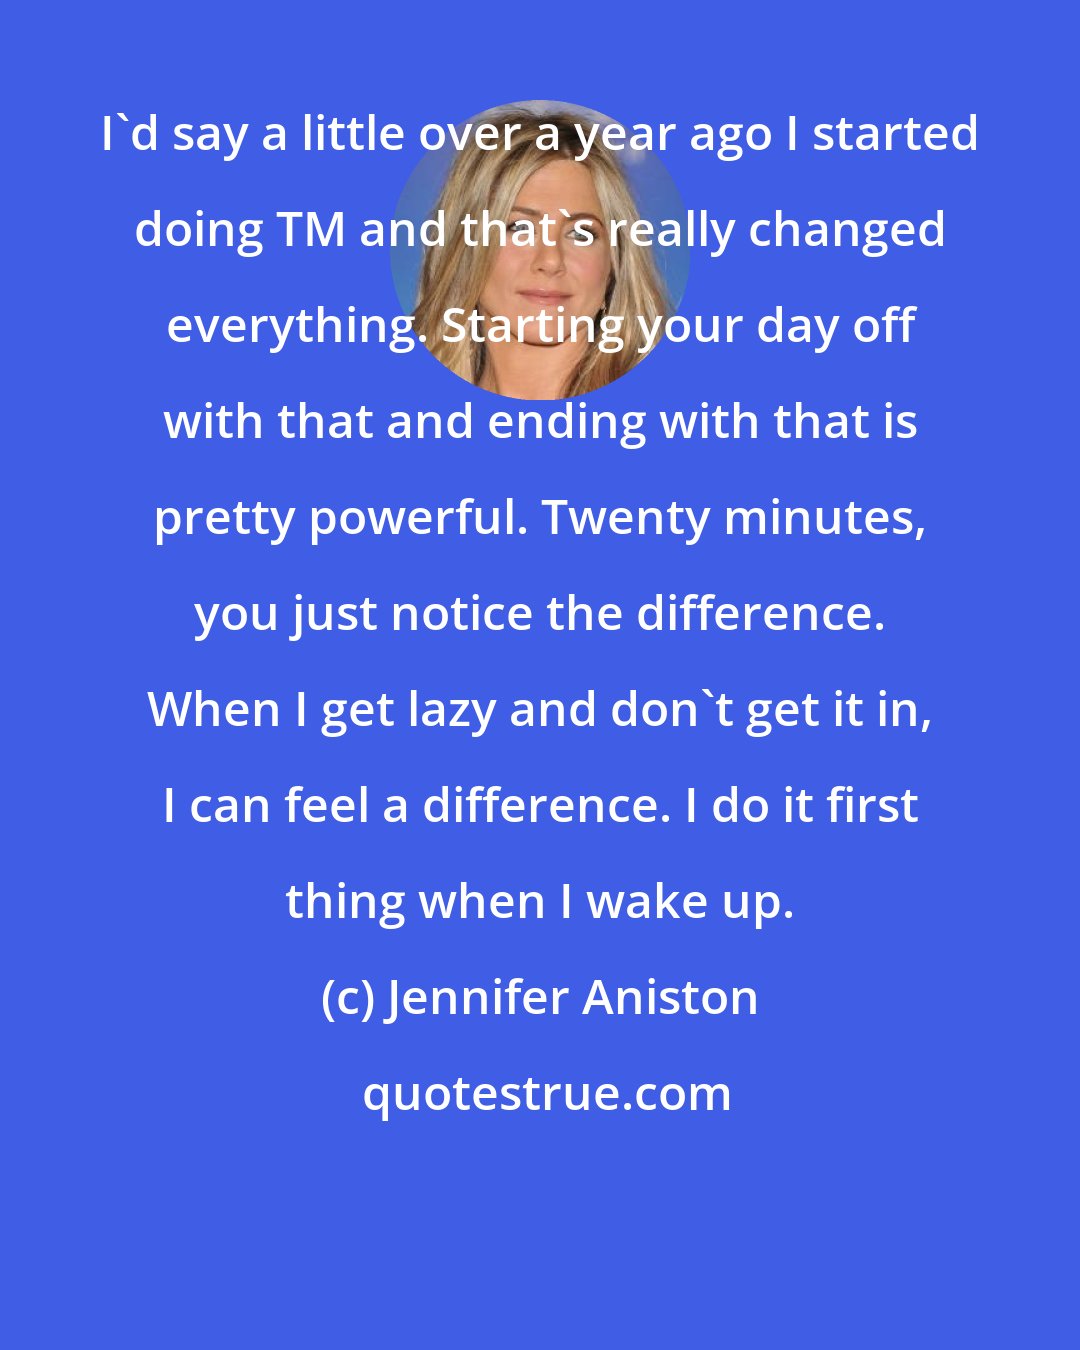 Jennifer Aniston: I'd say a little over a year ago I started doing TM and that's really changed everything. Starting your day off with that and ending with that is pretty powerful. Twenty minutes, you just notice the difference. When I get lazy and don't get it in, I can feel a difference. I do it first thing when I wake up.